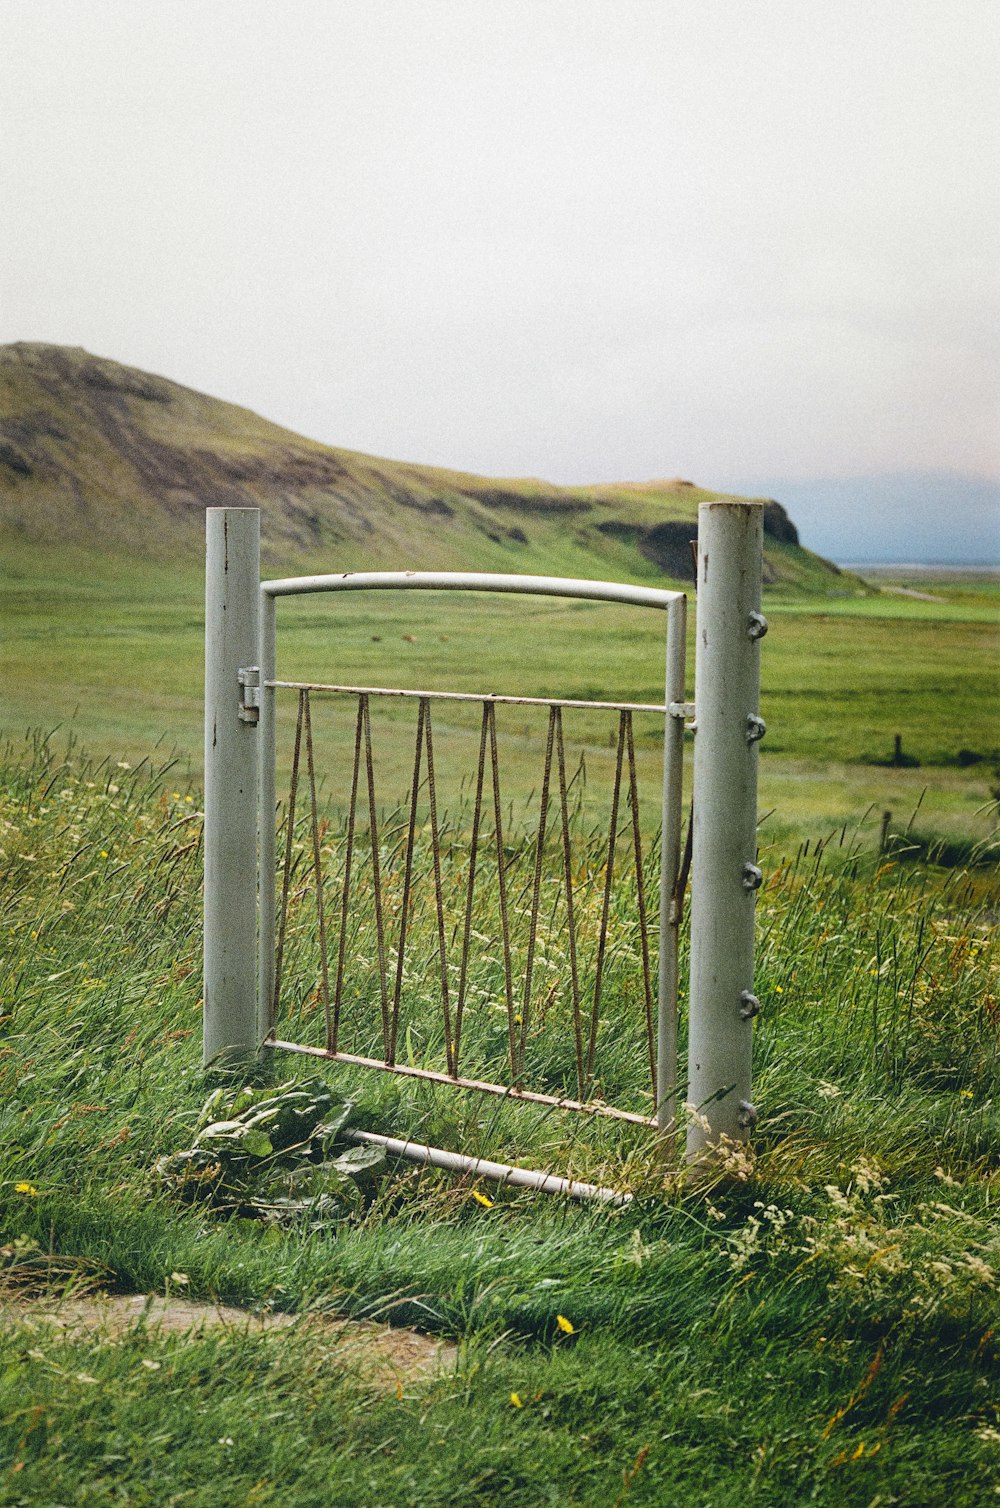 a gate in the middle of a grassy field